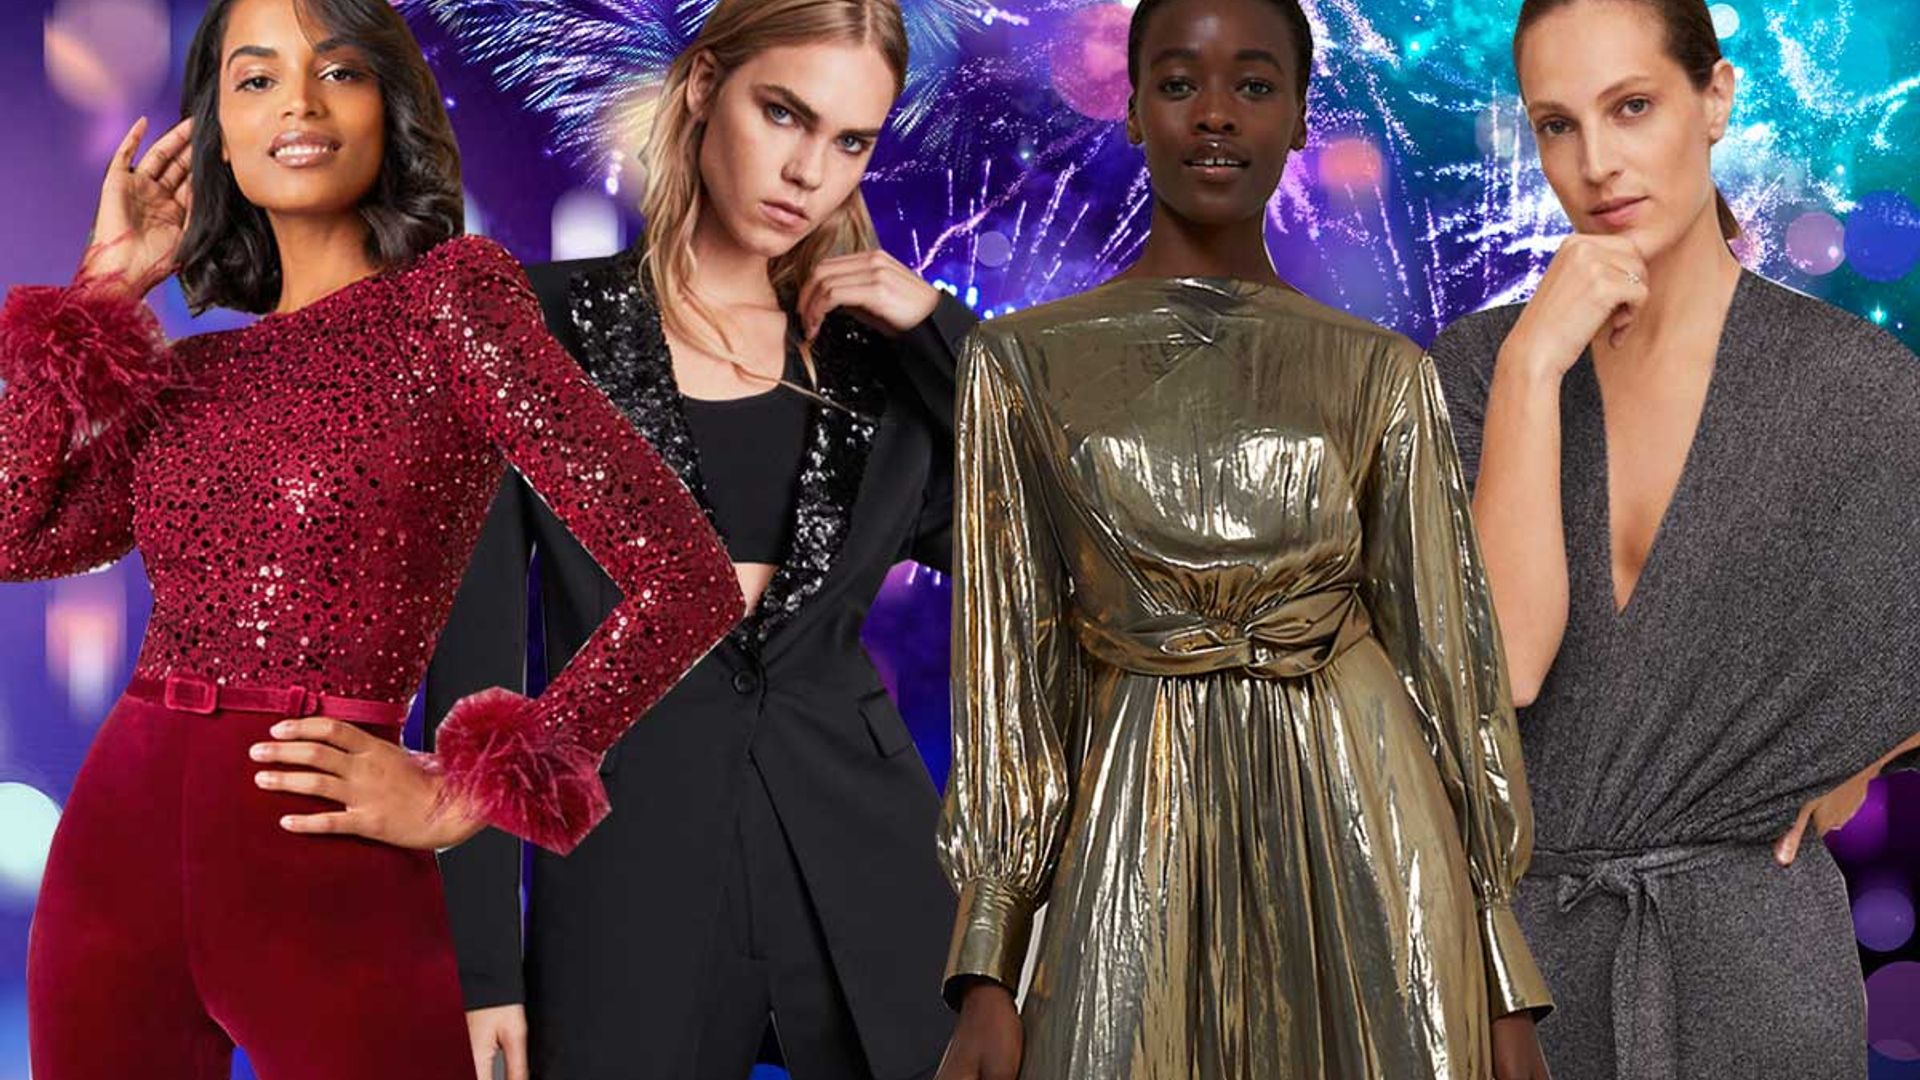 12 best NYE outfits for ringing in 2022 in style (even if you're just at home)